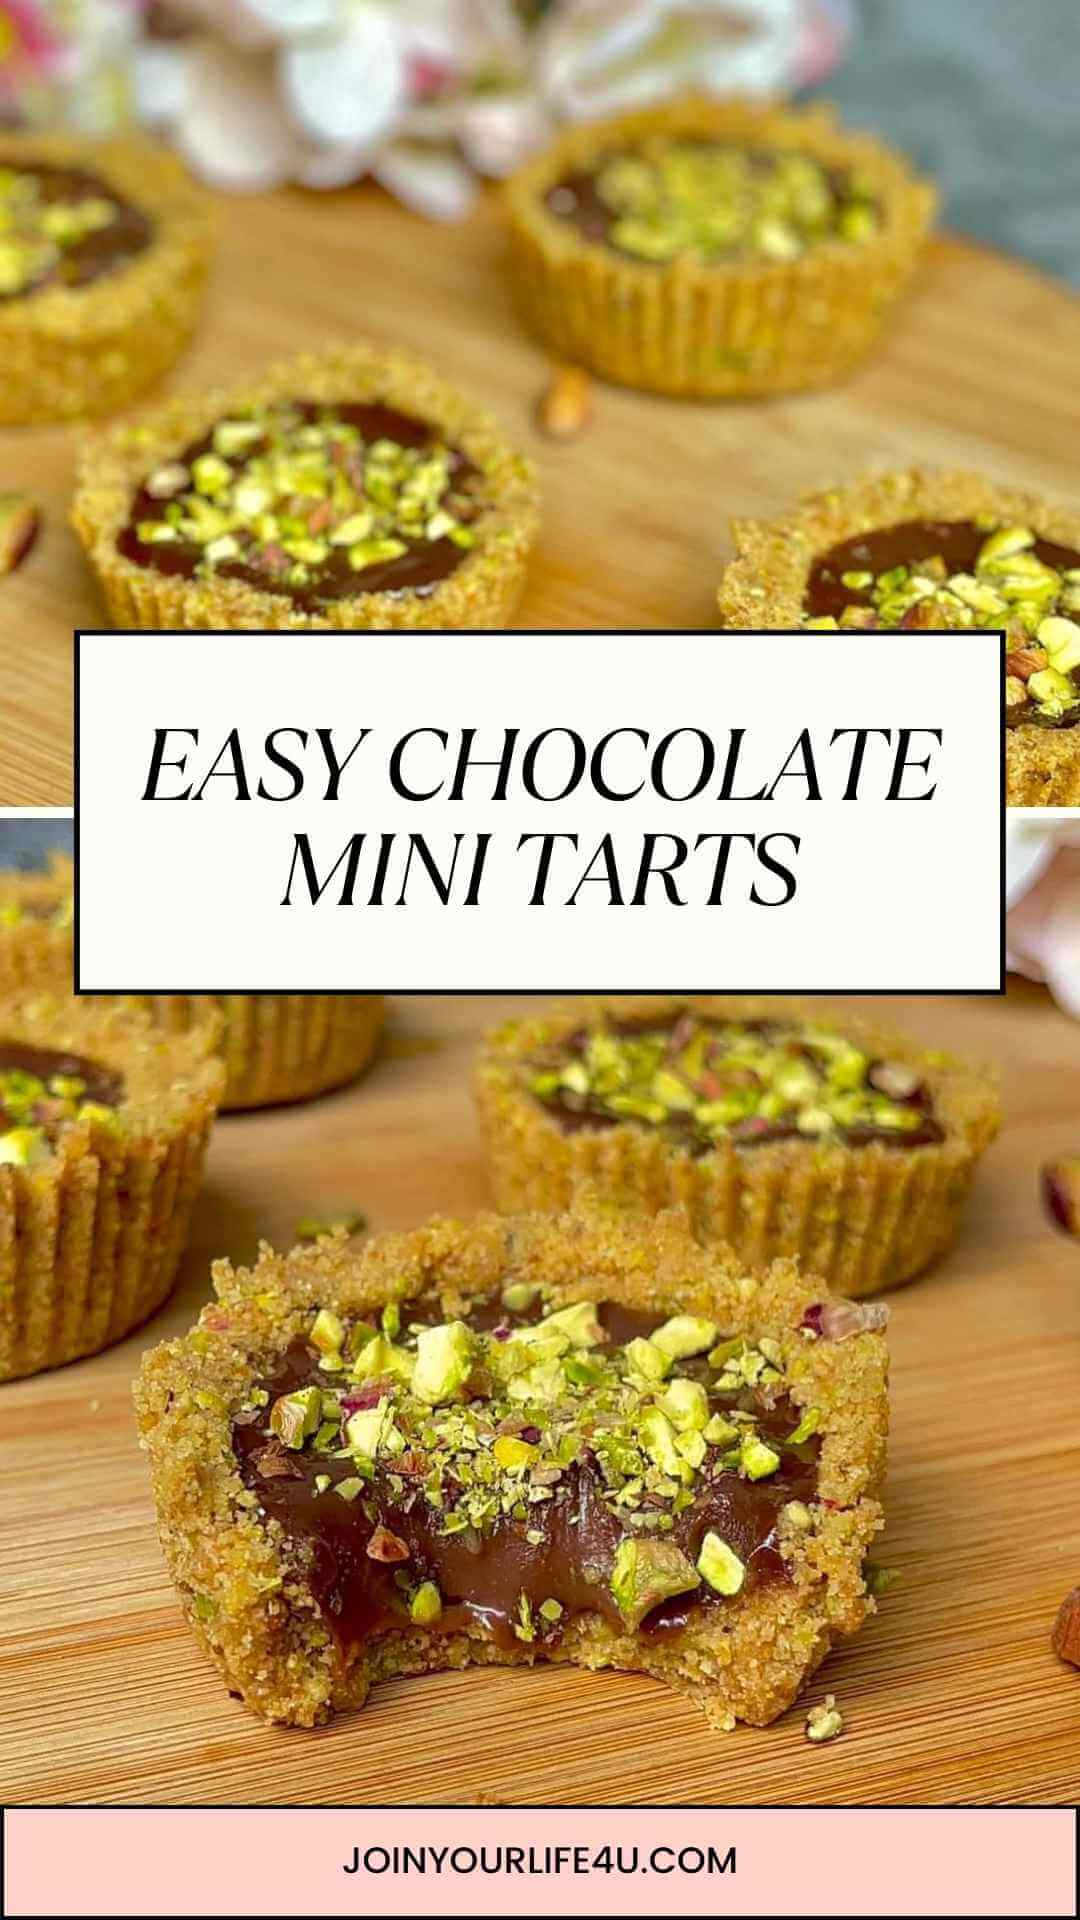 Chocolate Mini Tarts garnished with chopped pistachios on a wooden board.